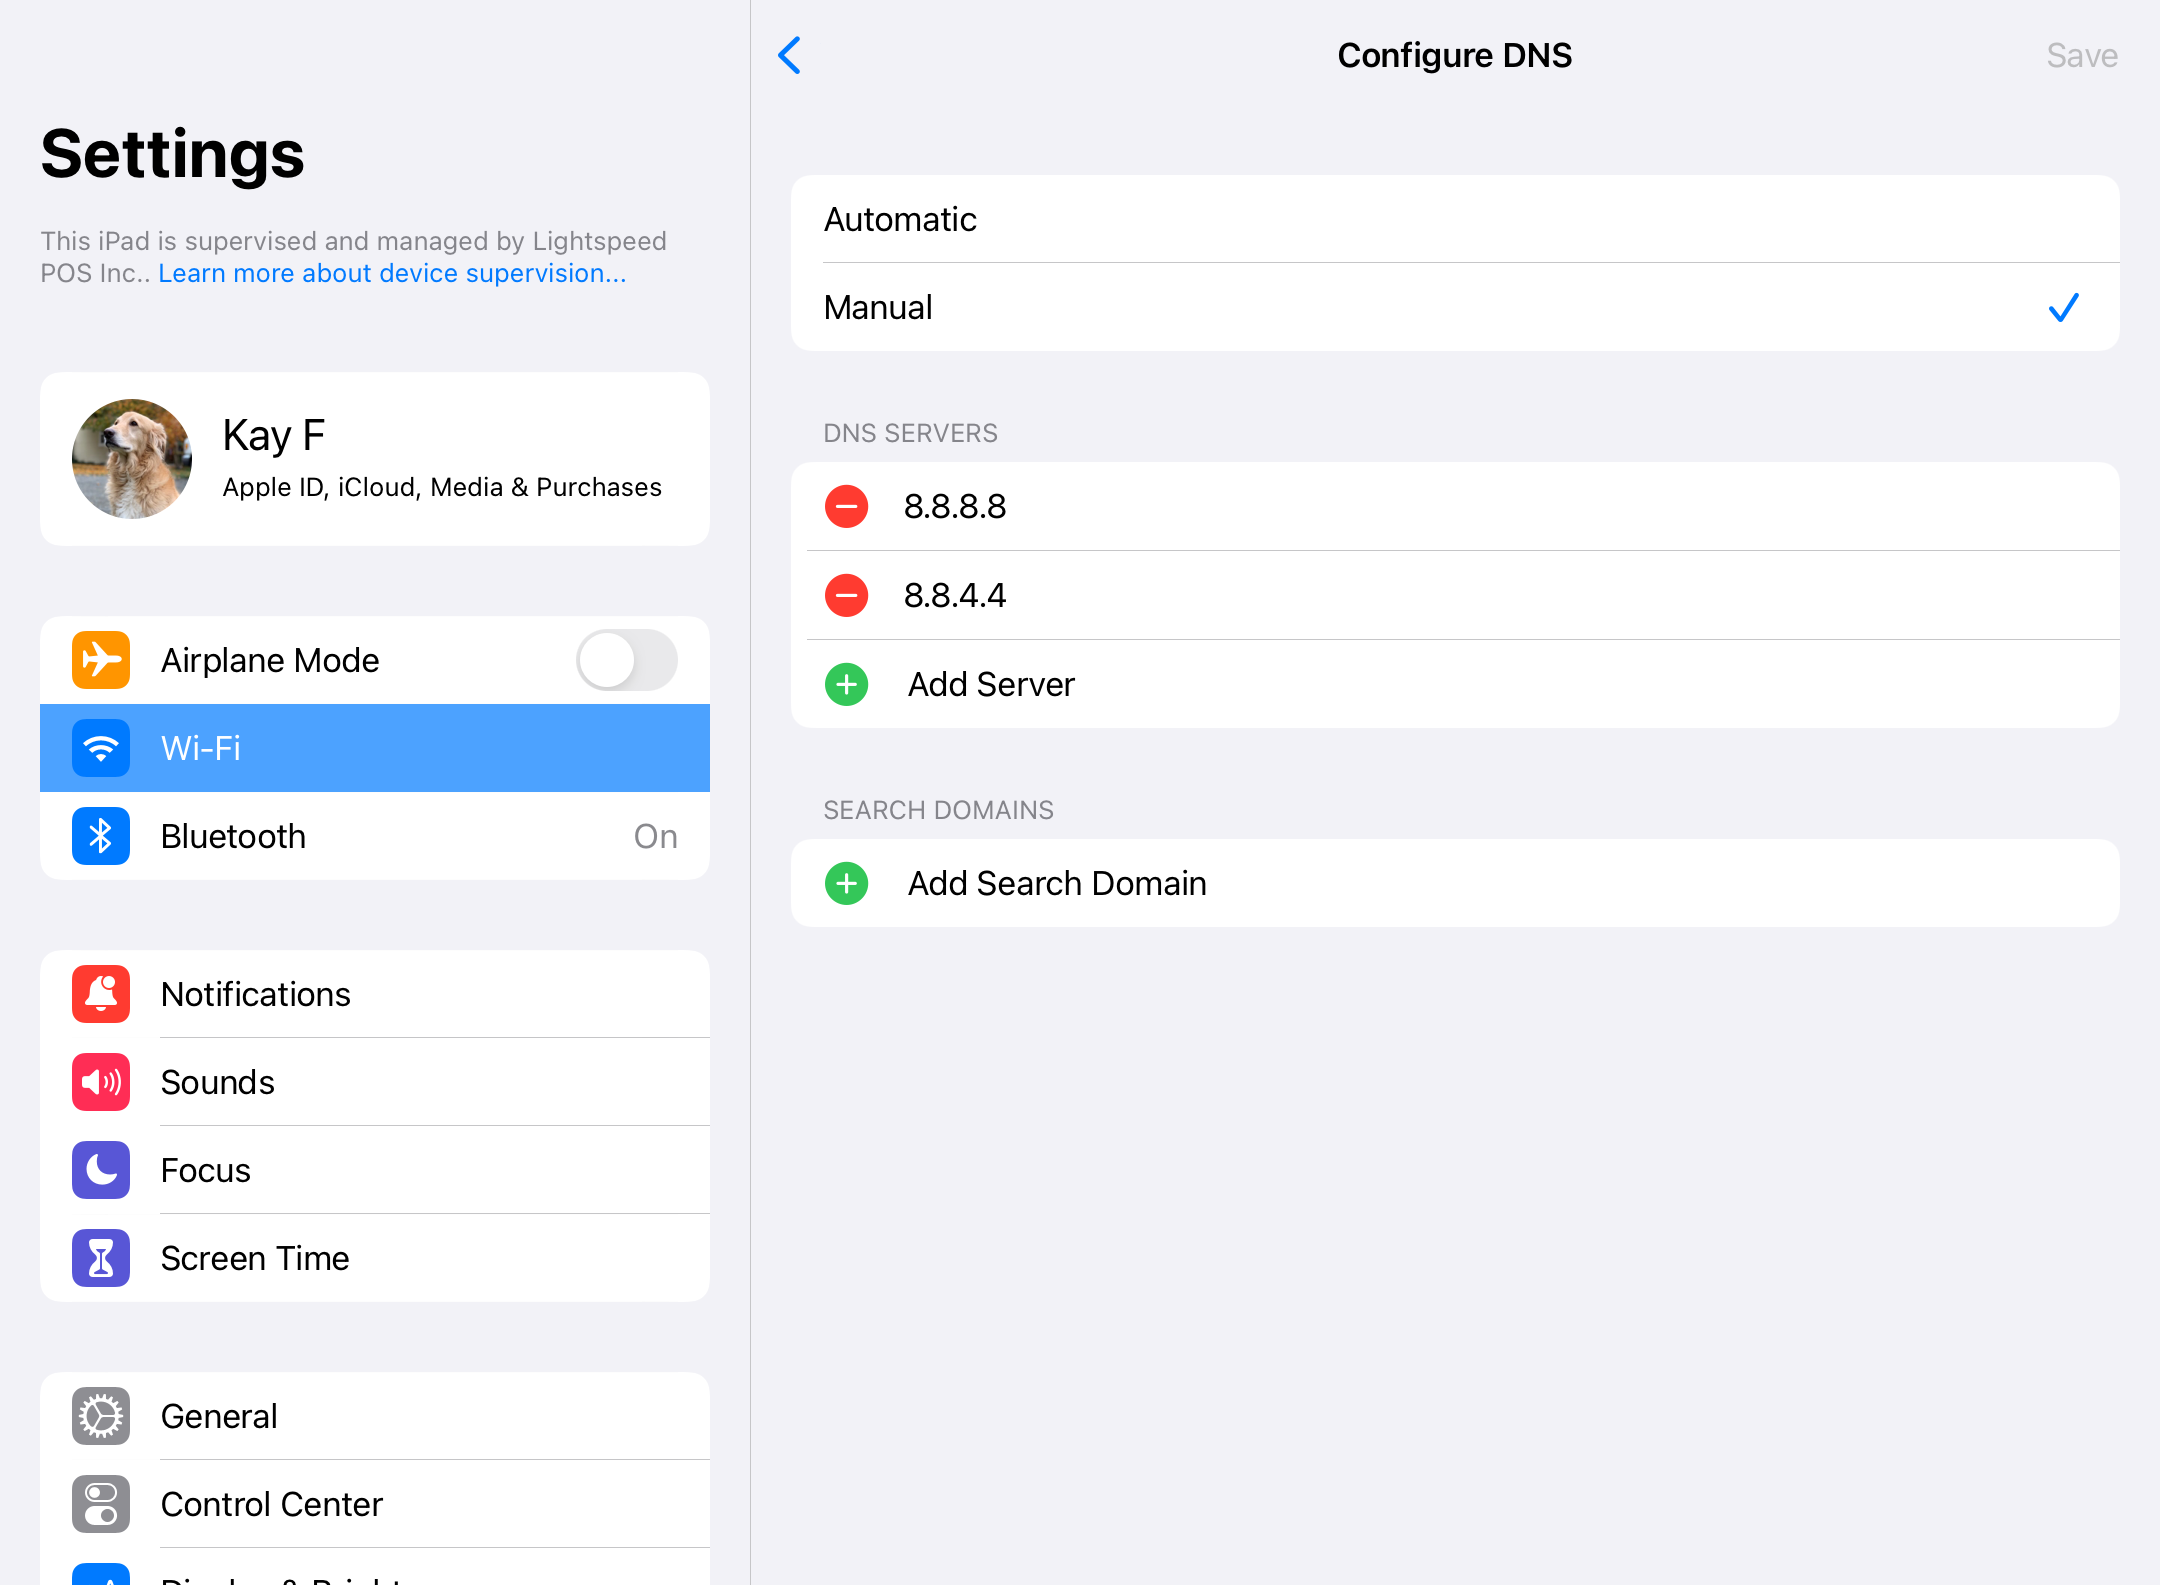 Image shows the DNS Configuration page for iPad. The setting titled Manual has been selected, and the DNS servers 8.8.8.8 and 8.8.4.4 have been added.